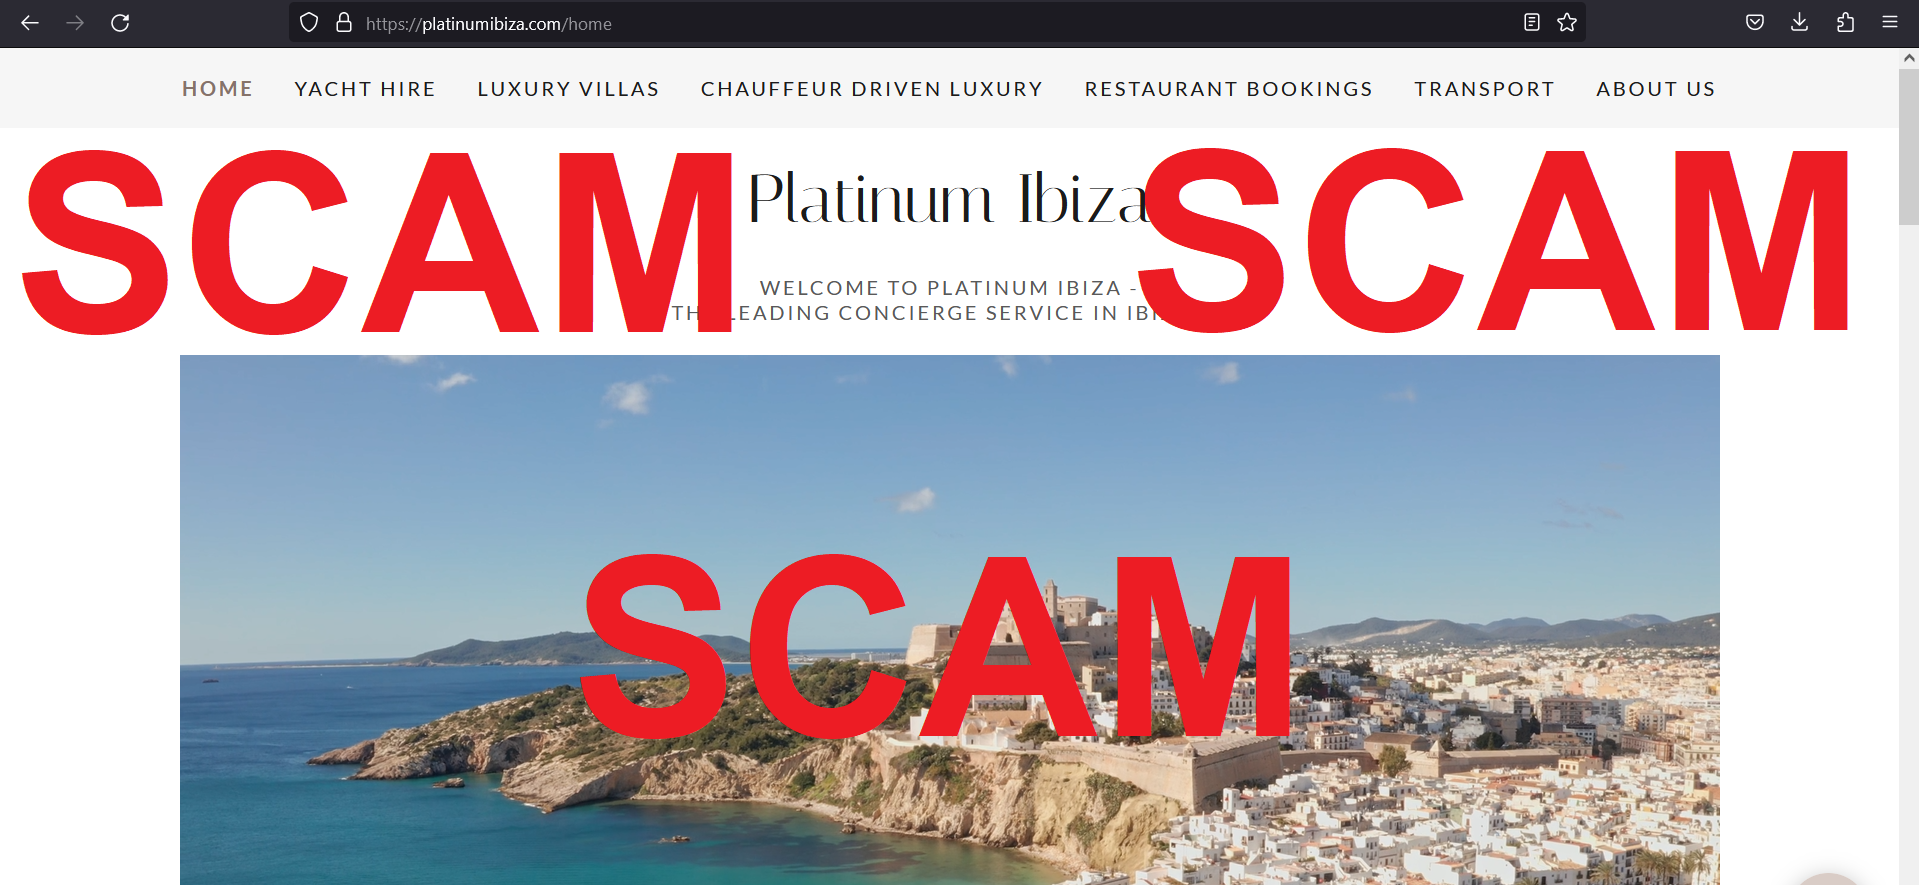 You are currently viewing Fraudulent website: platinumibiza.com SCAM SCAM